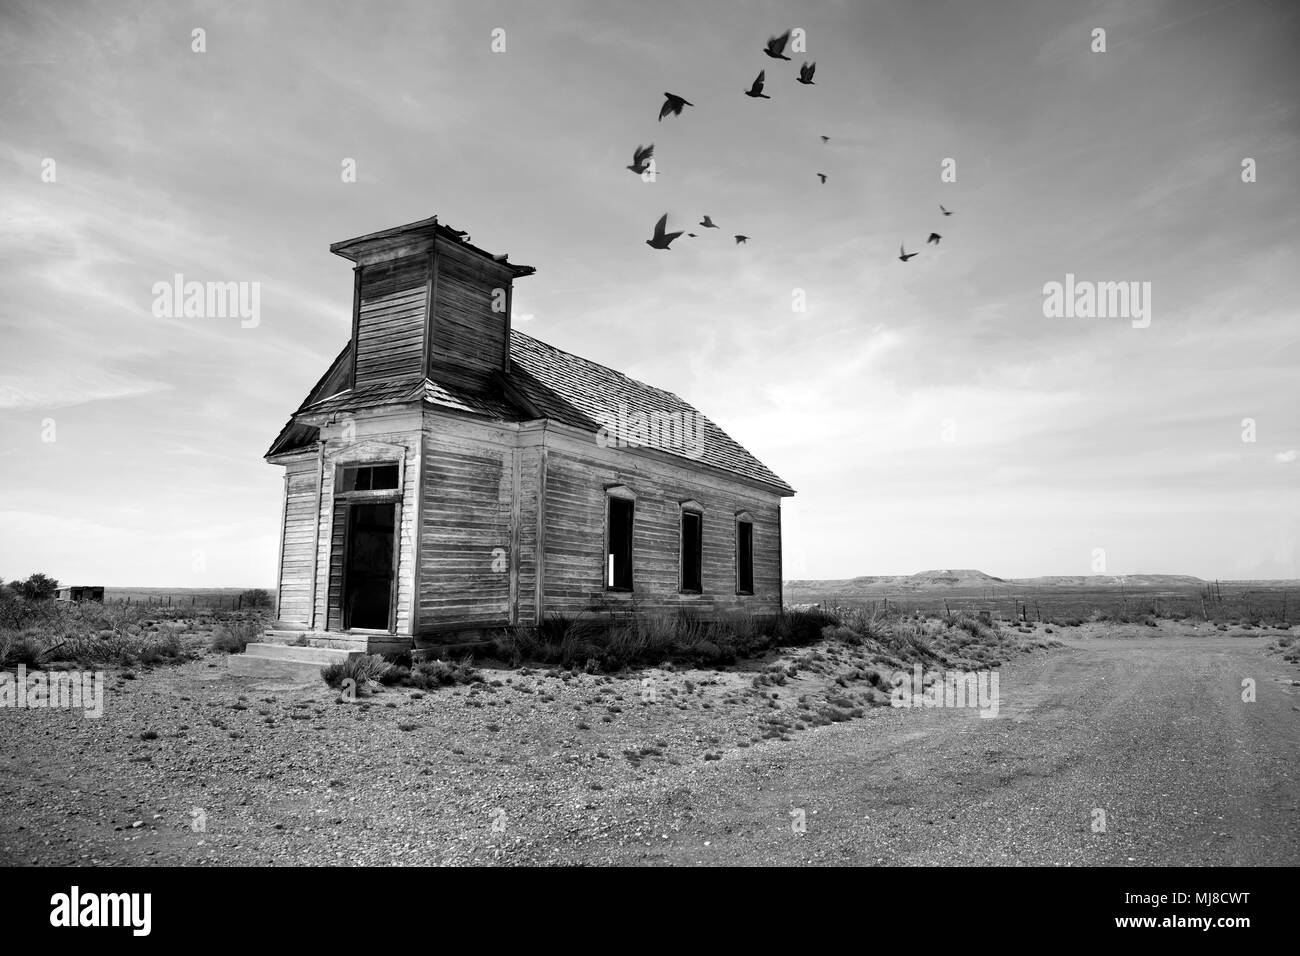 Exterior view of abandoned wooden chapel in remote area, flock of birds in cloudy sky. Stock Photo